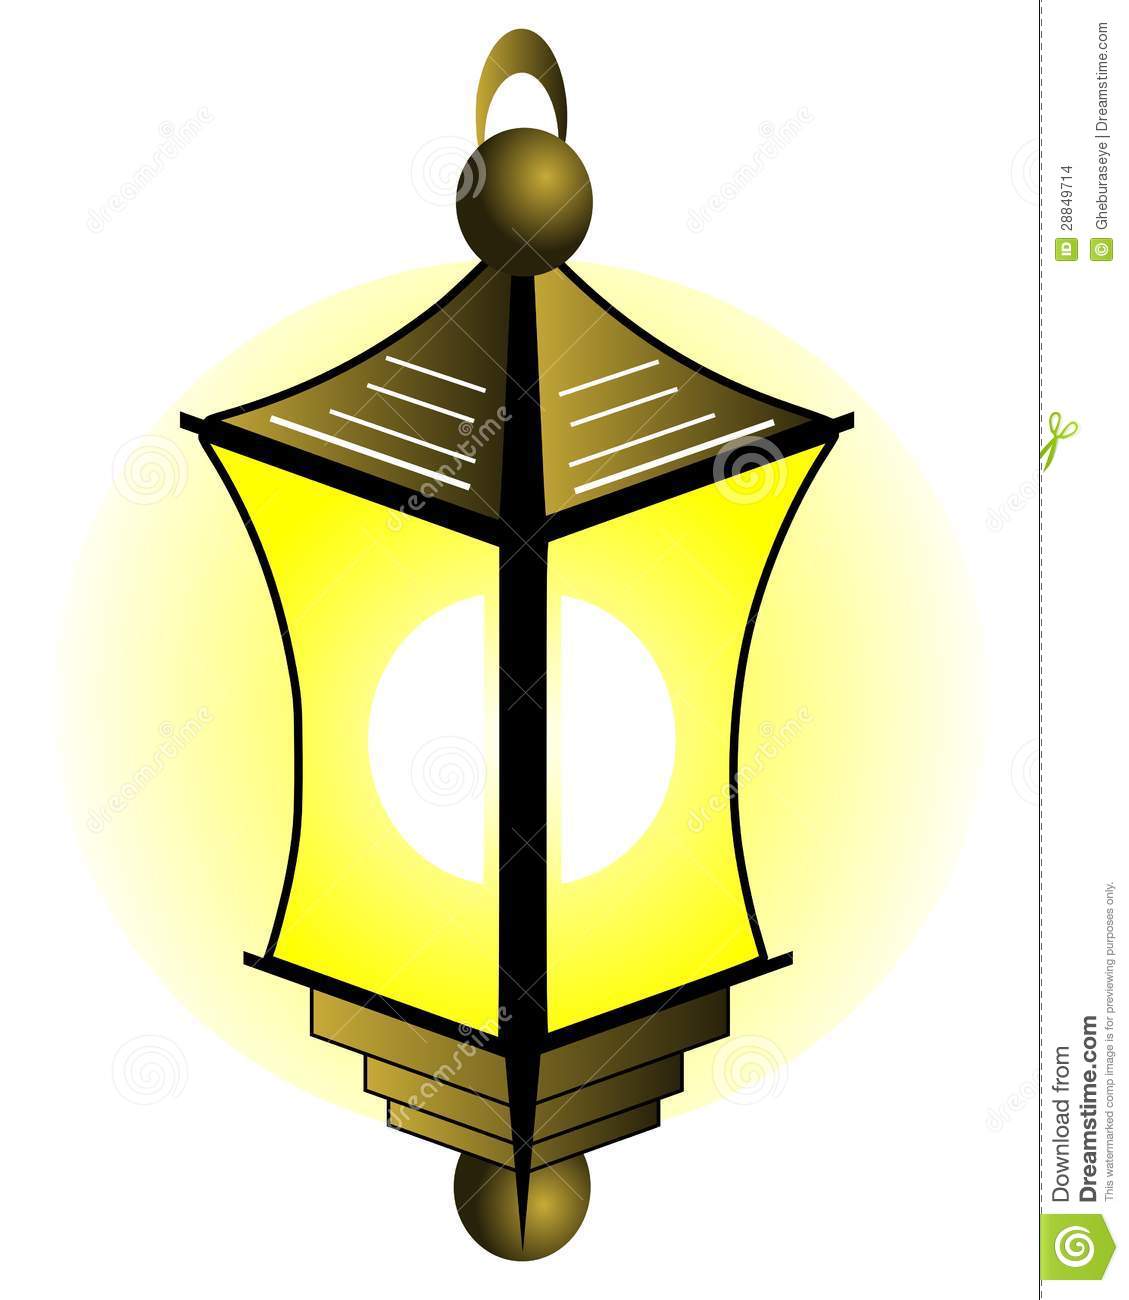 Porch Light Stock Images   Image  28849714